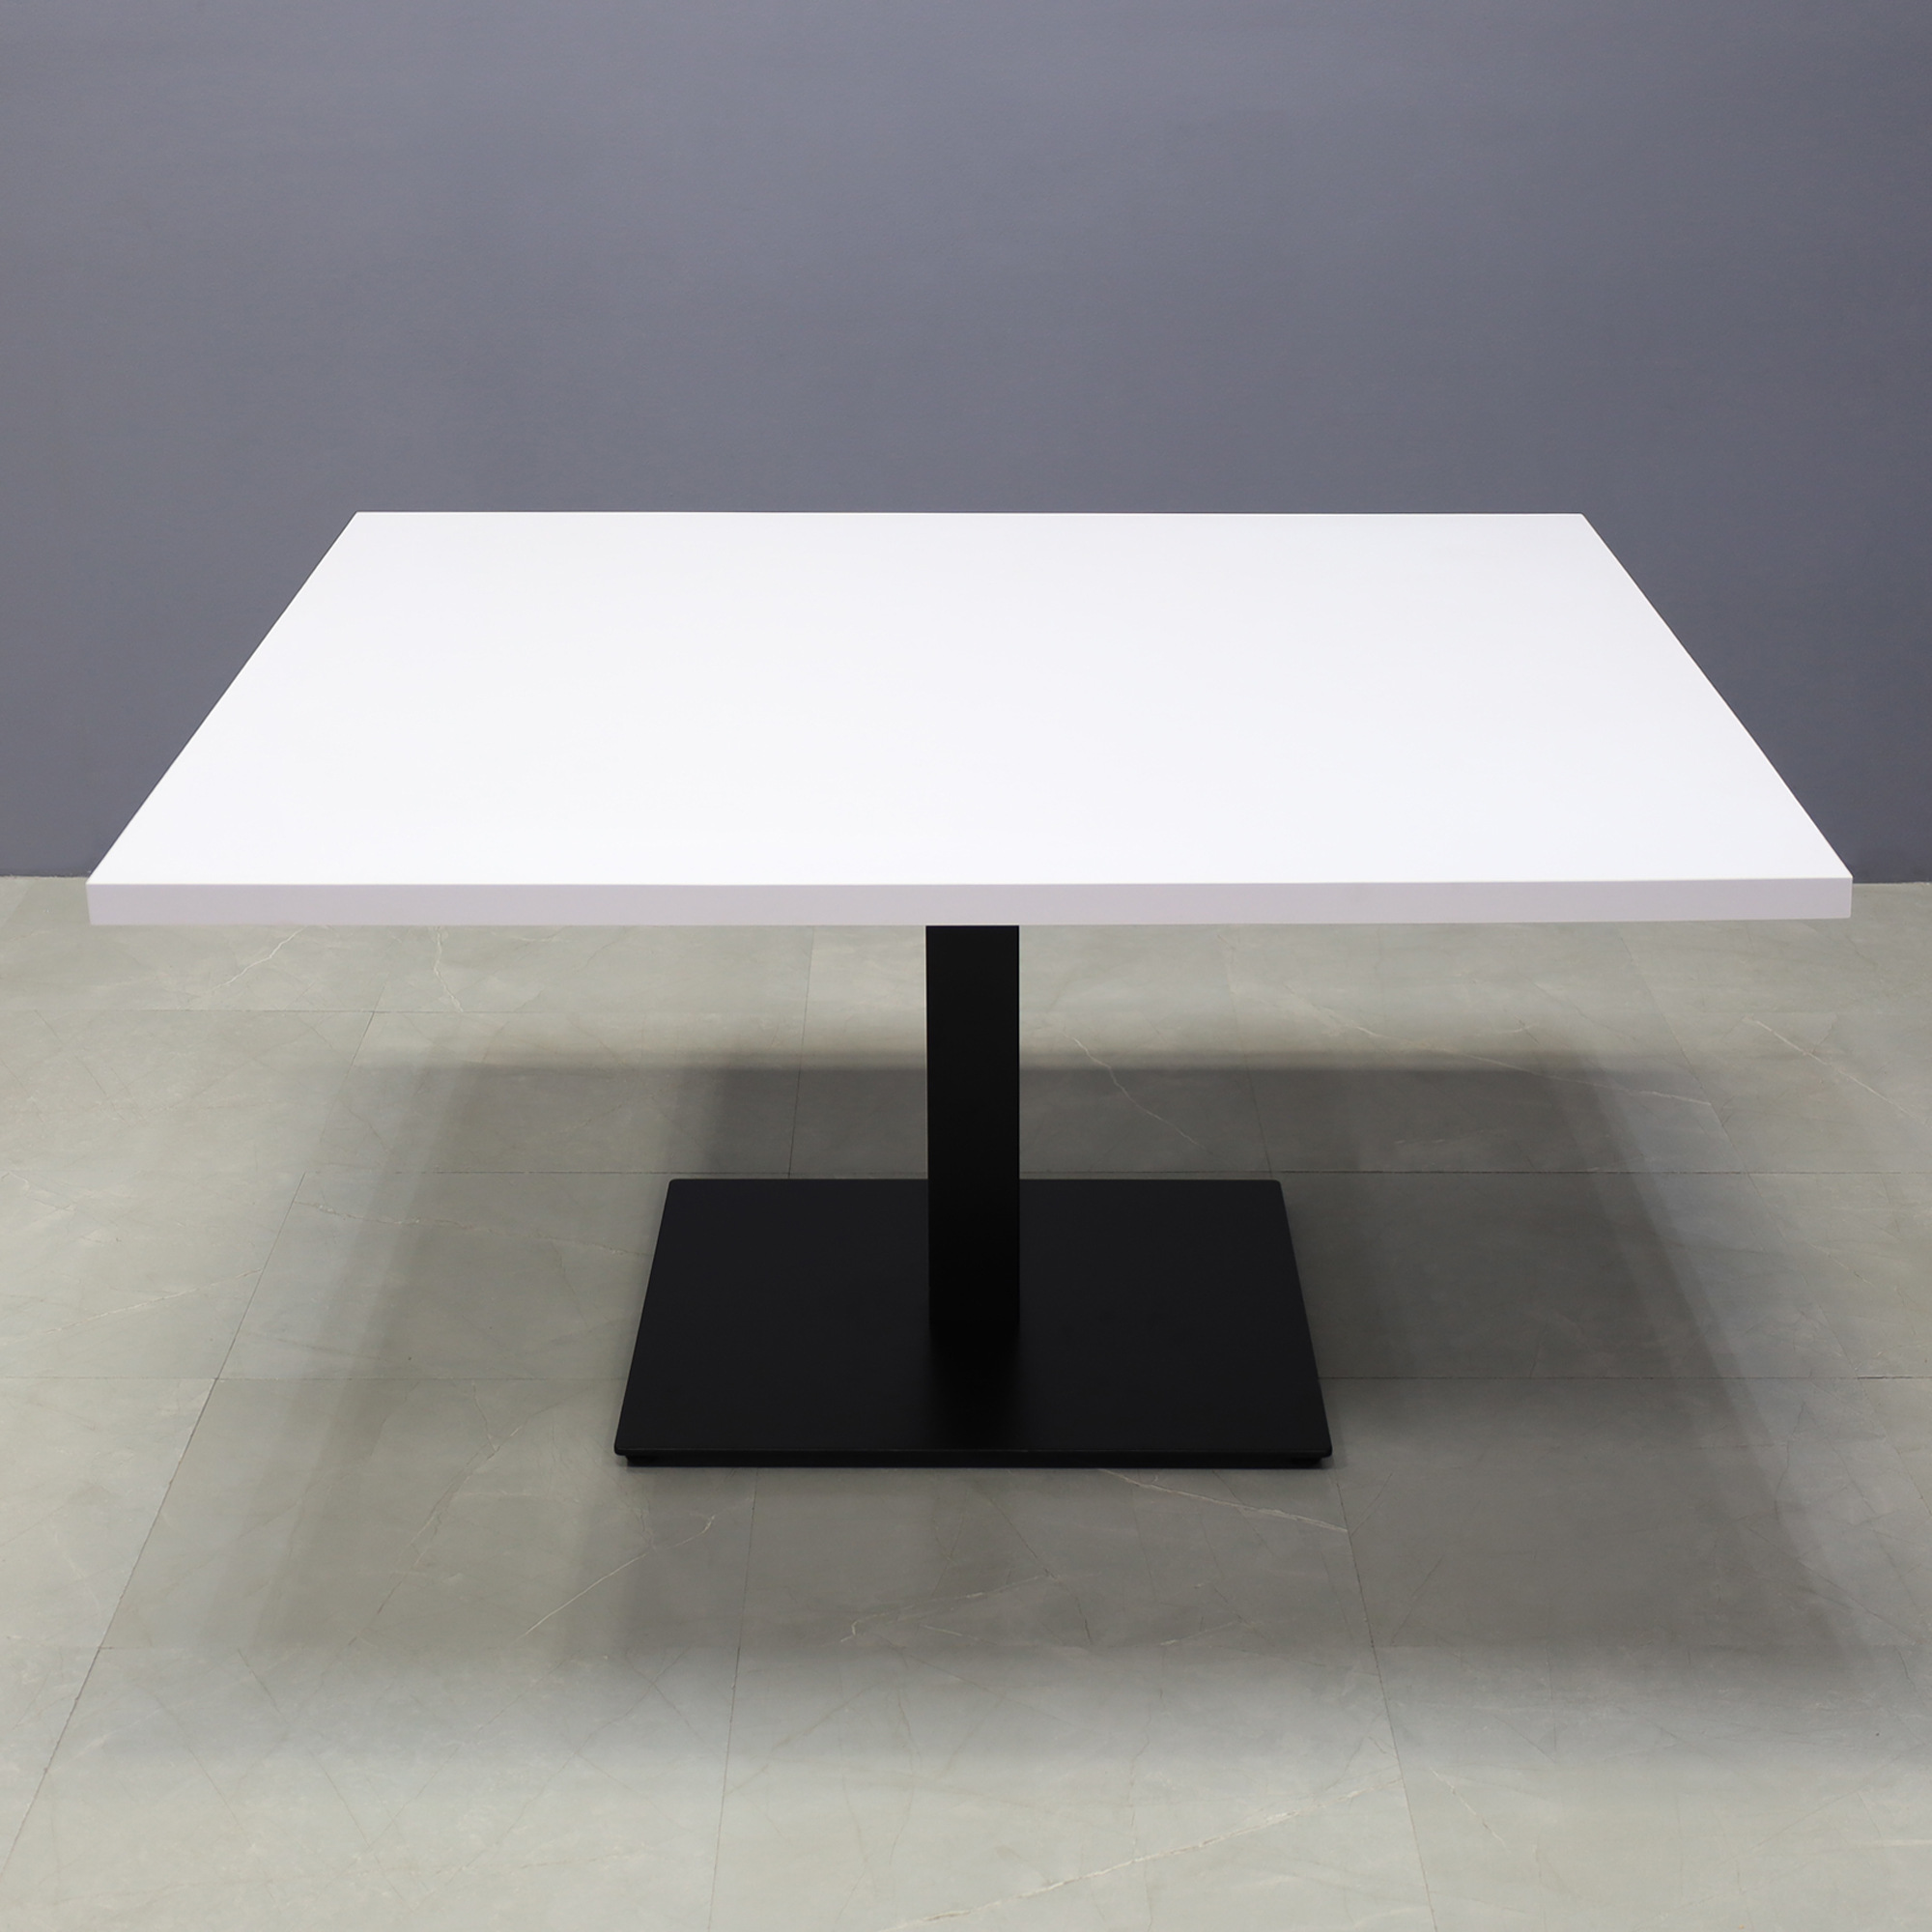 60-inch California Square Conference Table with Laminate Top in white matte and black stainless steel base, shown here.